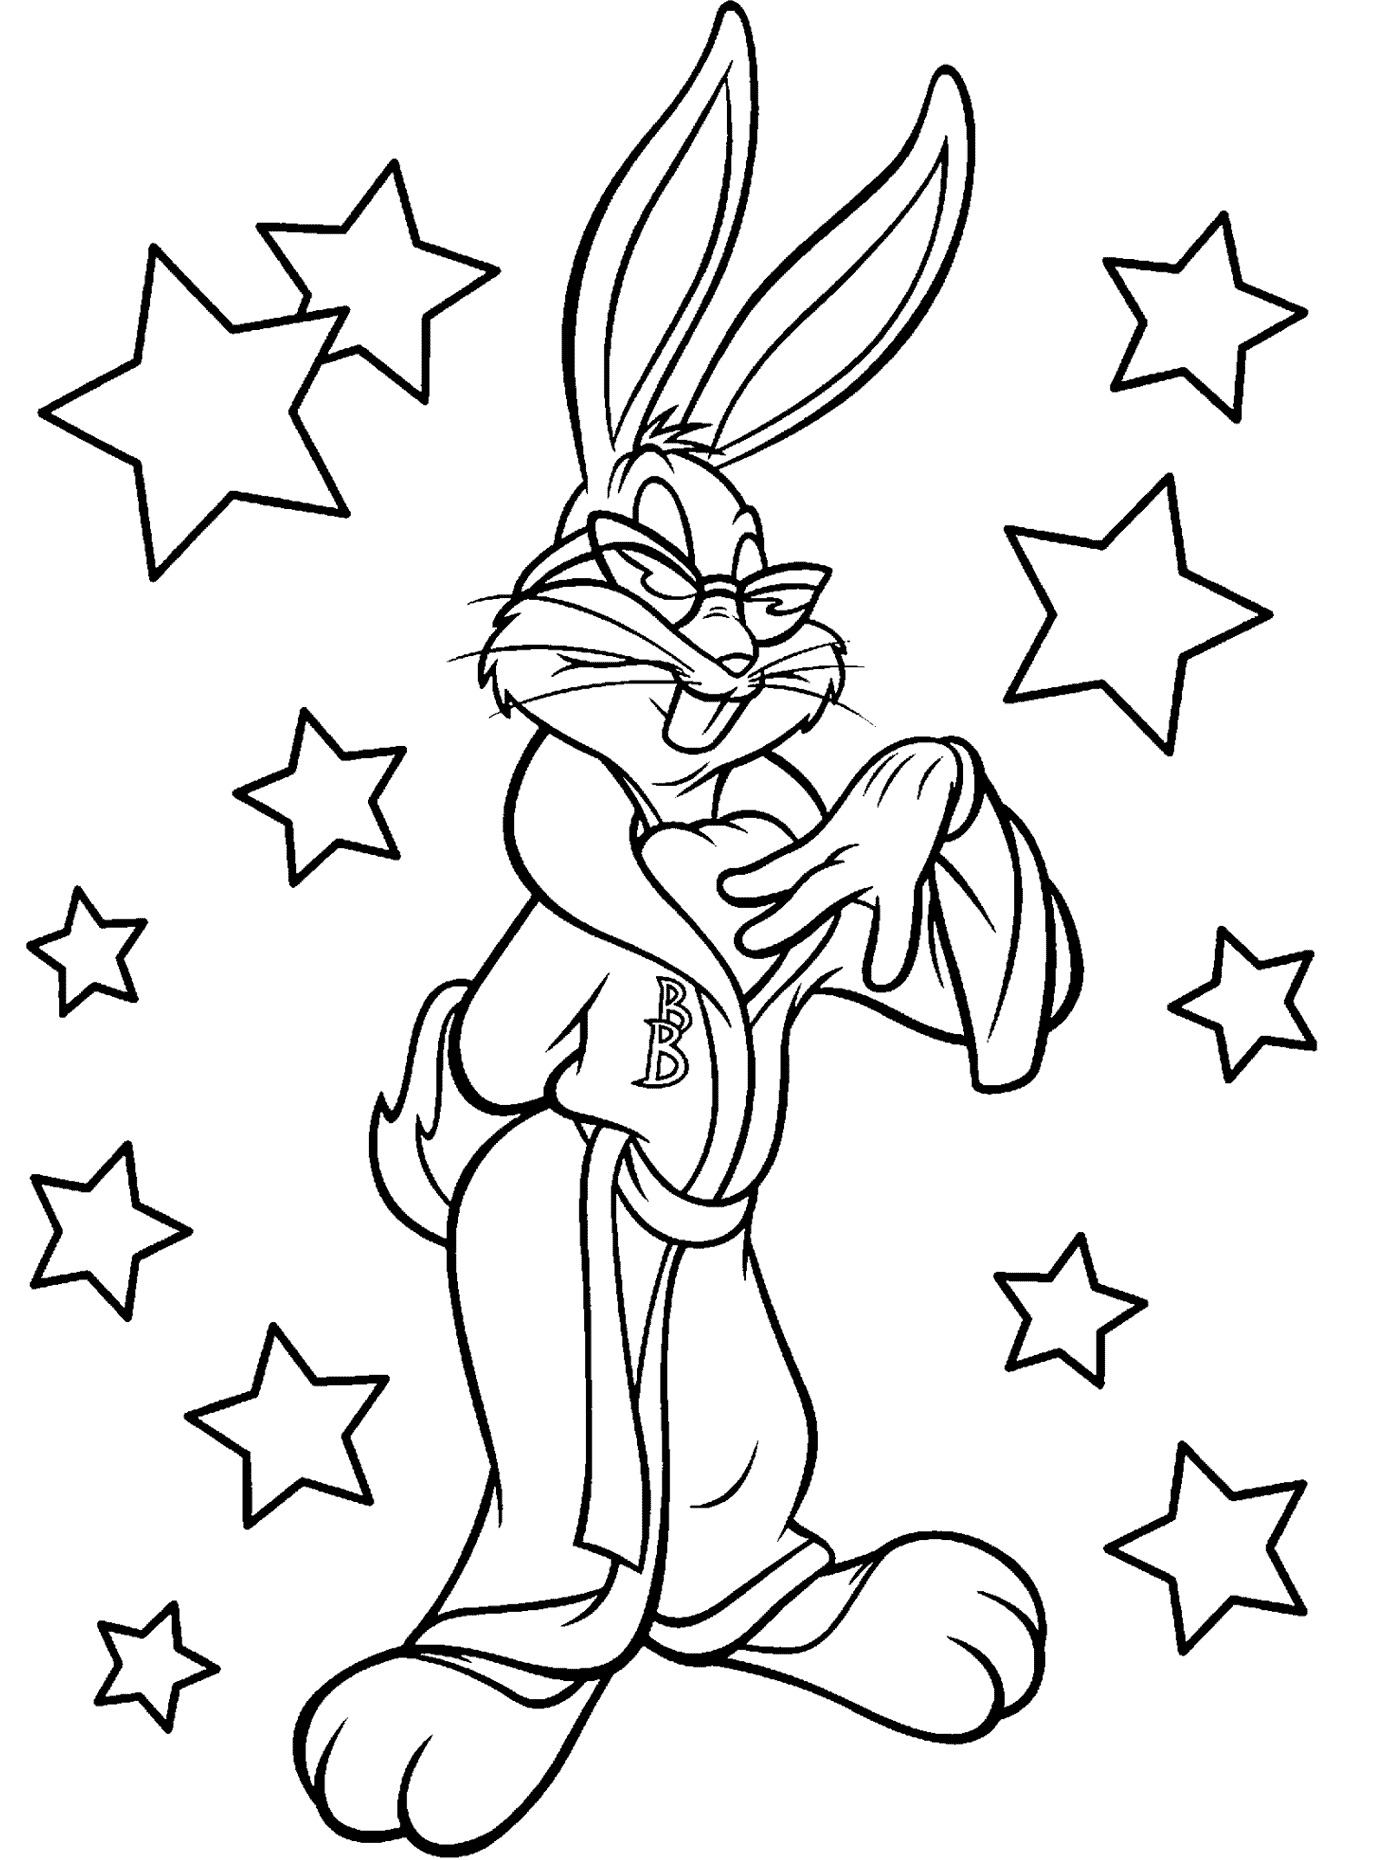 Printable Bugs Bunny Coloring Pages - Looney Tunes - Big Bang Fish - Free Printable Bugs Bunny Coloring Pages